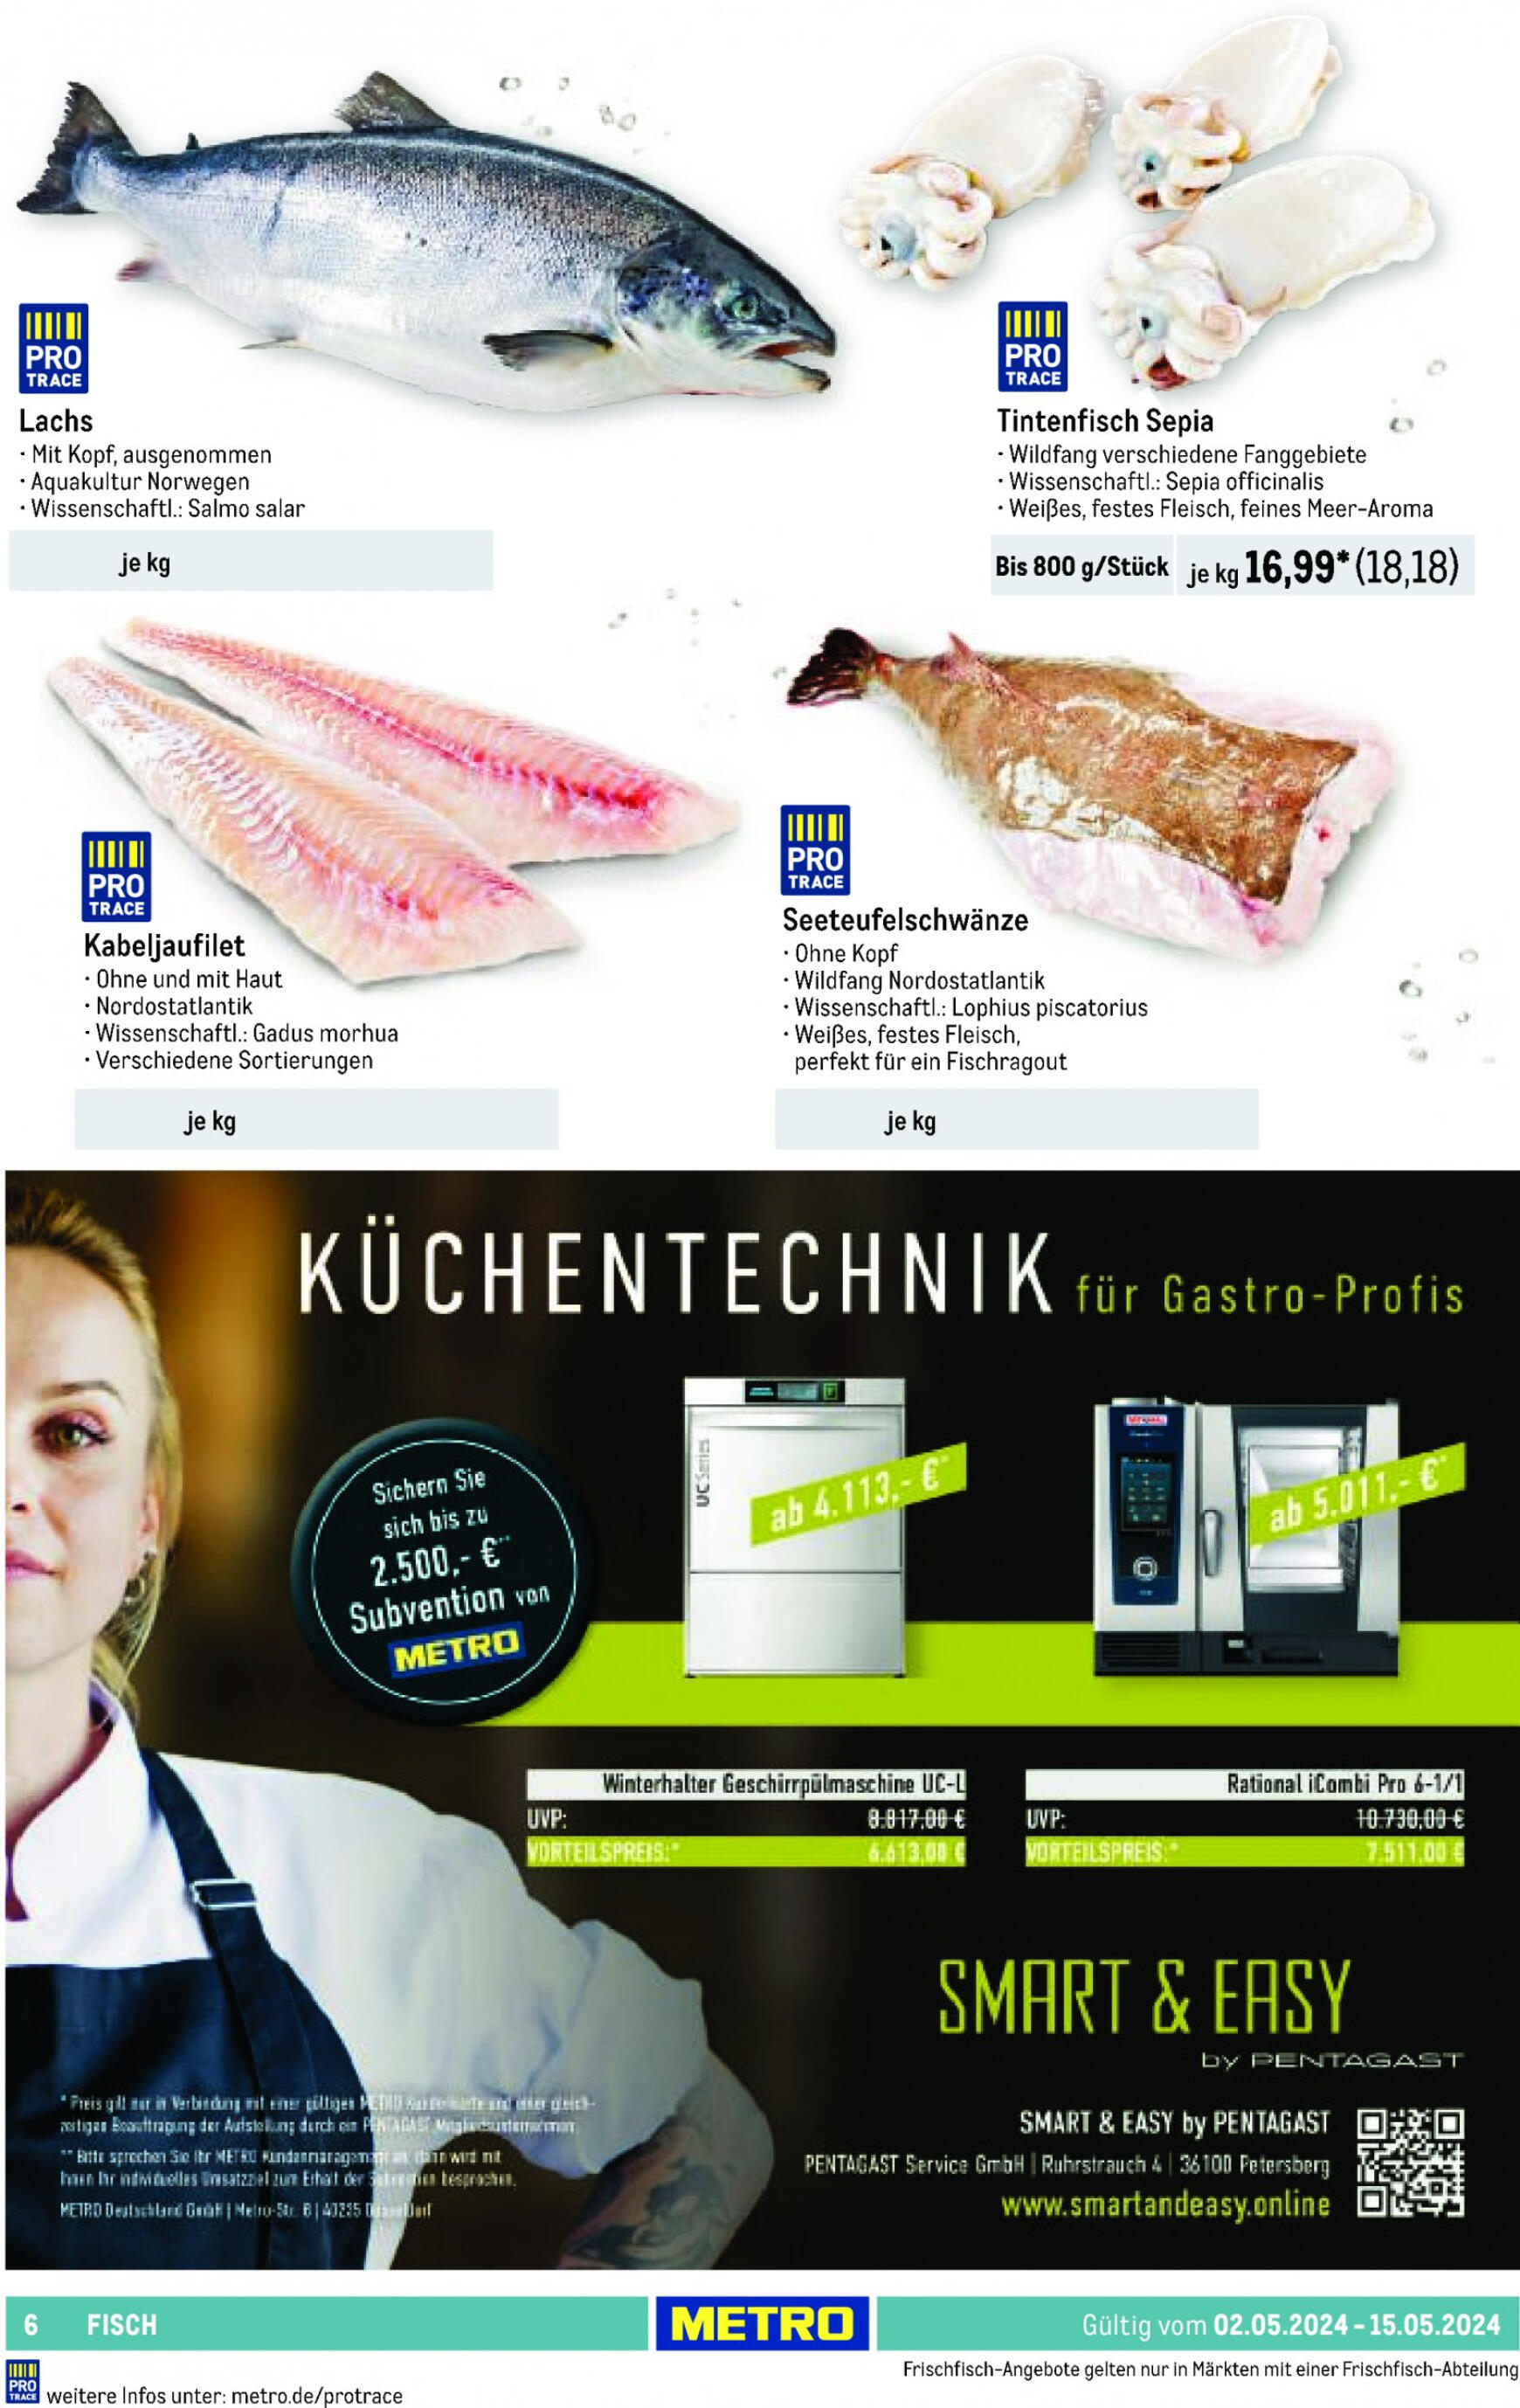 metro - Flyer Metro - GastroJournal aktuell 02.05. - 15.05. - page: 6